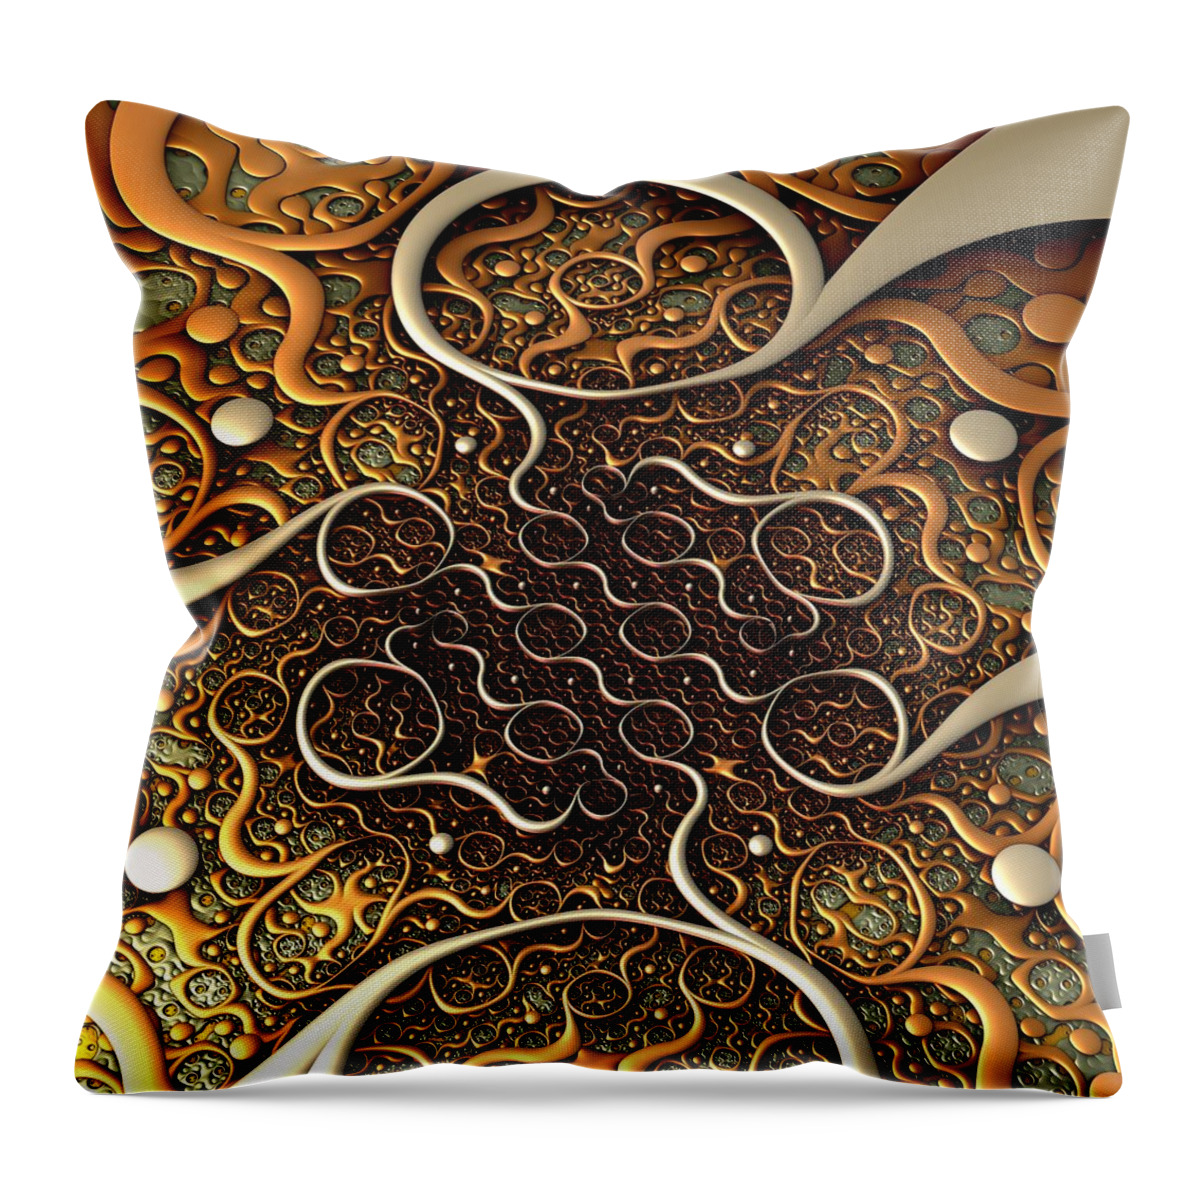 Metallic Throw Pillow featuring the digital art Creepy Crawlers by Lyle Hatch